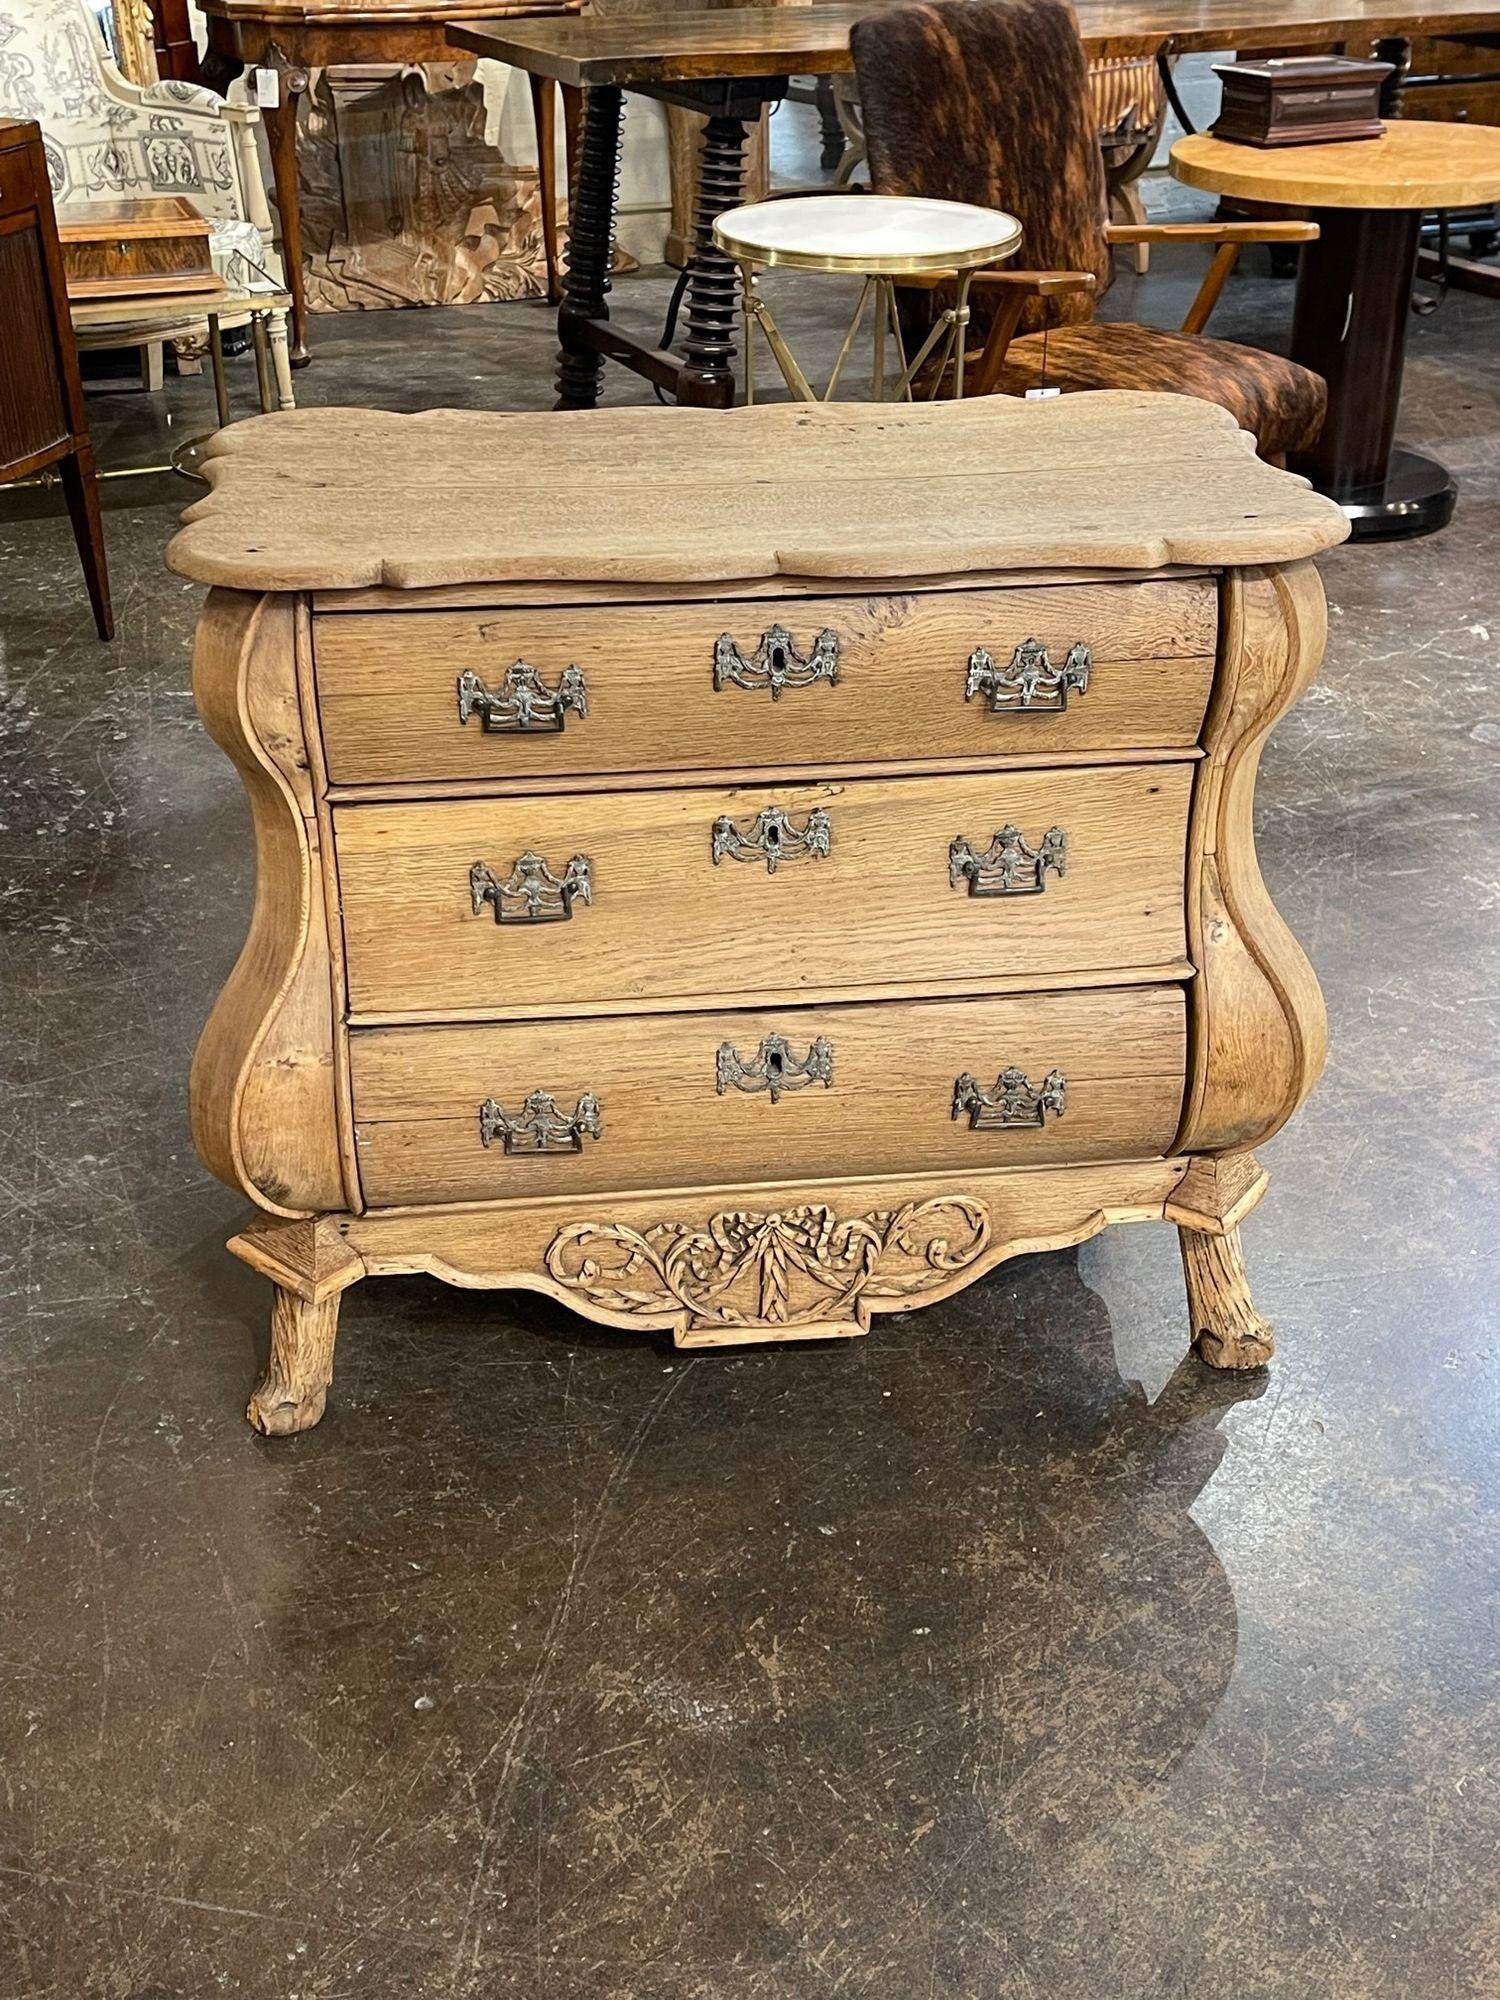 Handsome 19th century Dutch serpentine carved and bleached oak chest. Beautiful scale and shape on this piece and lovely patina as well. The chest also has 3 drawers for storage and nice carvings as well. Fabulous!